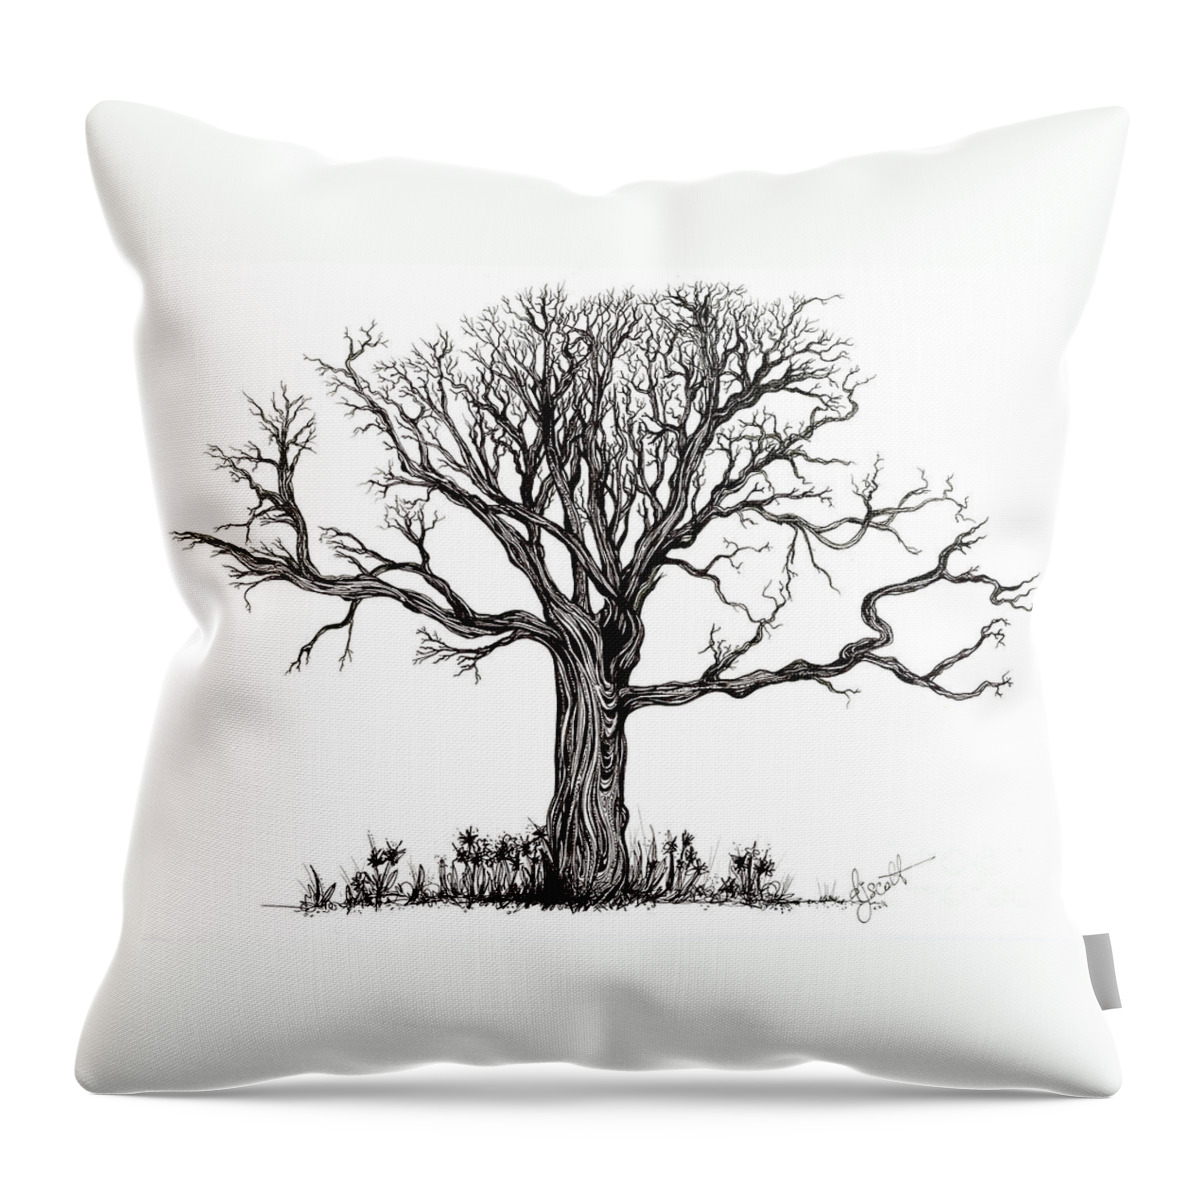 Tree Throw Pillow featuring the drawing Uprooted by Danielle Scott